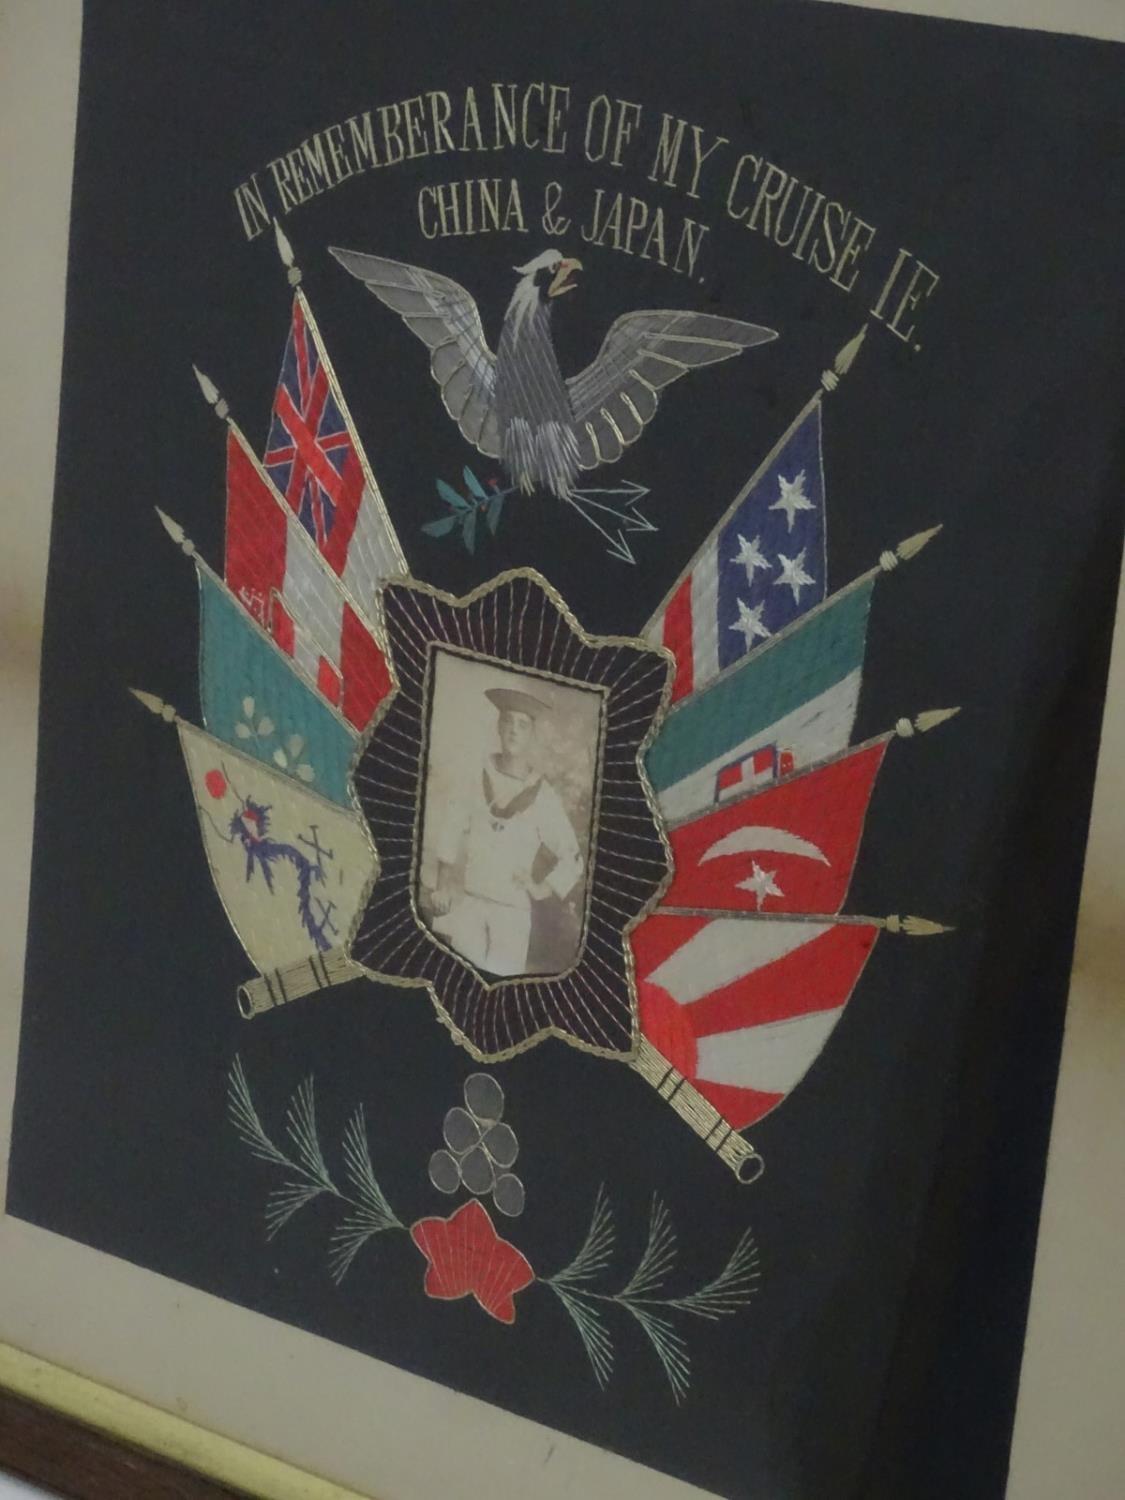 Militaria: a c1900 US Navy framed memento, entitled 'In Remembrance of my Cruise ie. China & Japan.' - Image 2 of 11